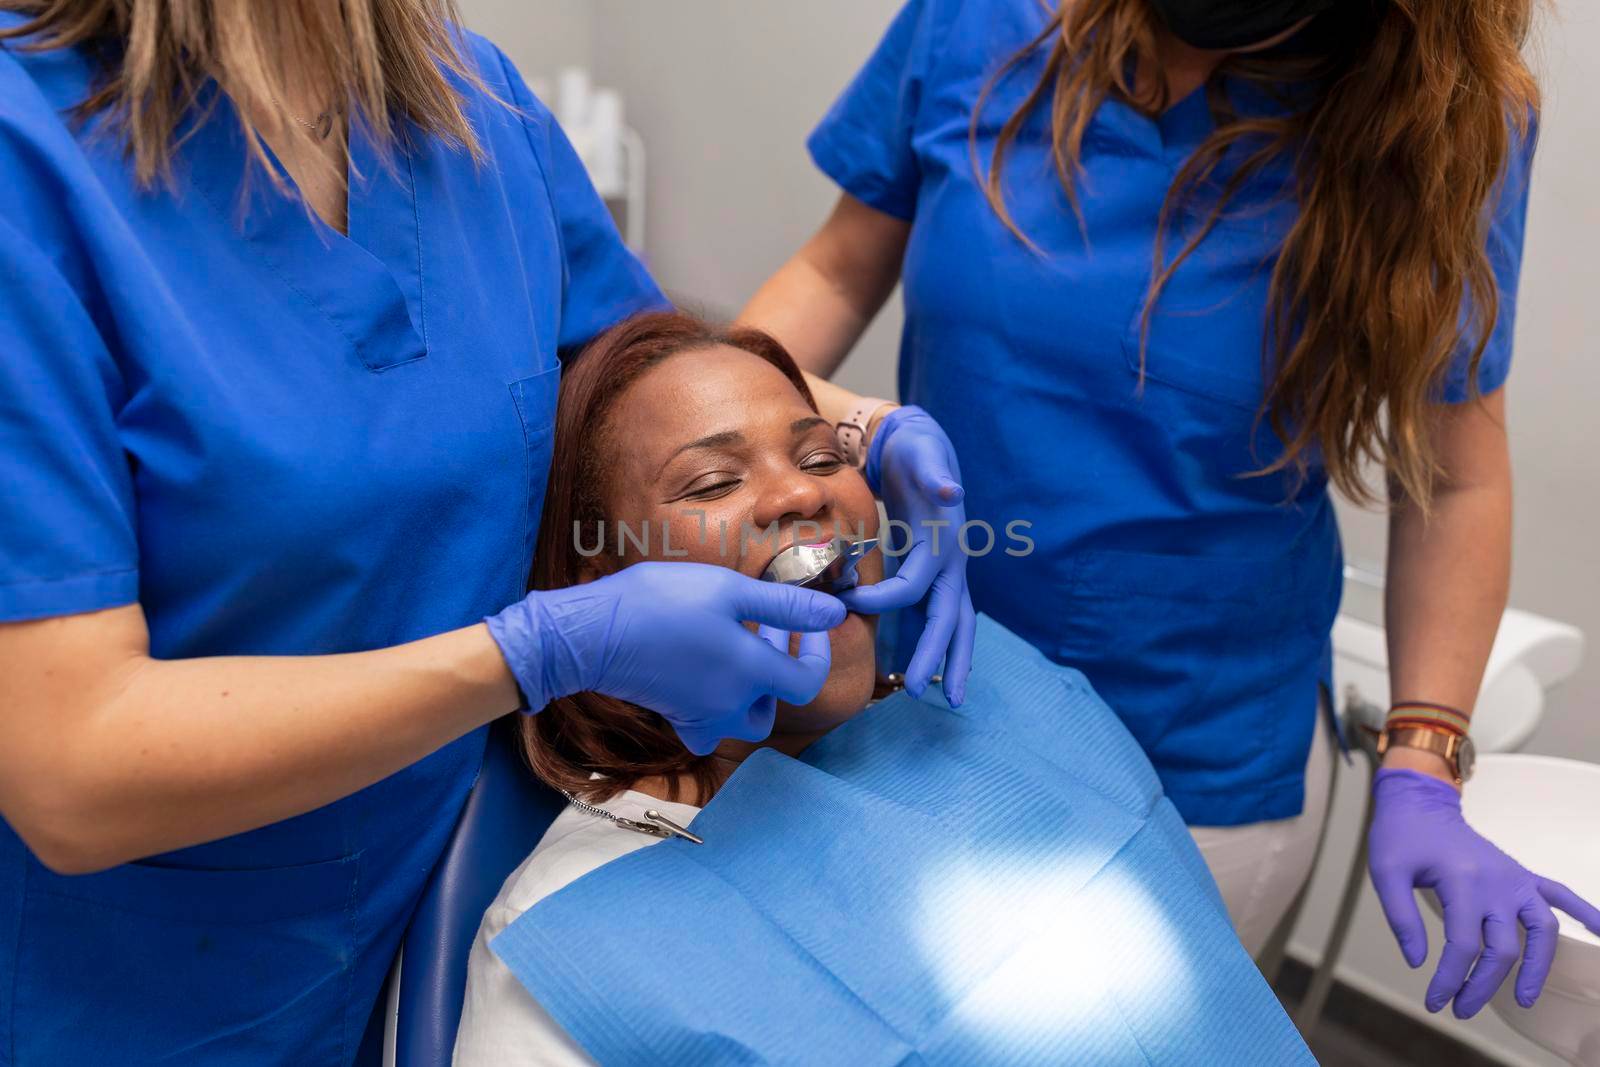 A black woman patient being put on an impression tray by stockrojoverdeyazul